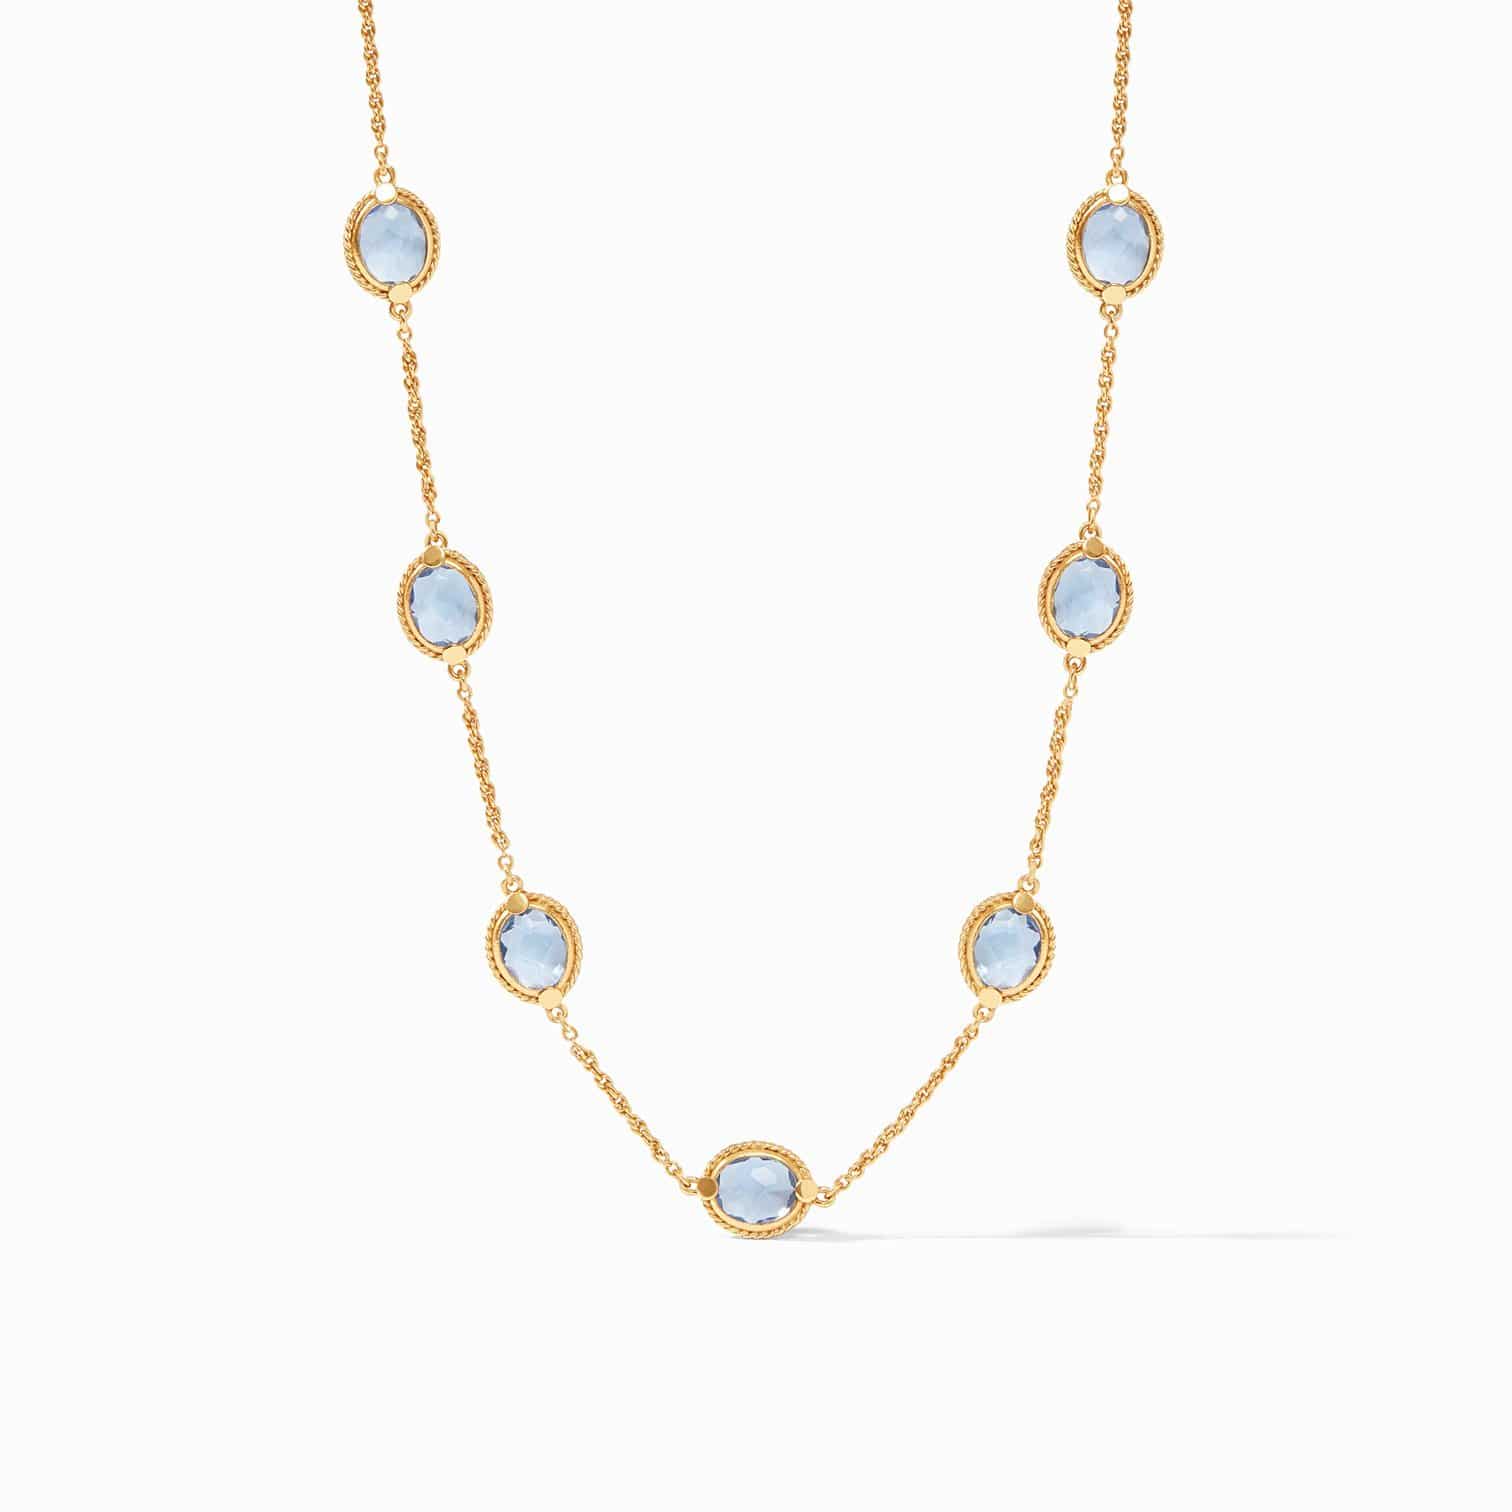 Julie Vos - Julie Vos Calypso Delicate Station Necklace with Chalcedony Blue Stones - Little Miss Muffin Children & Home